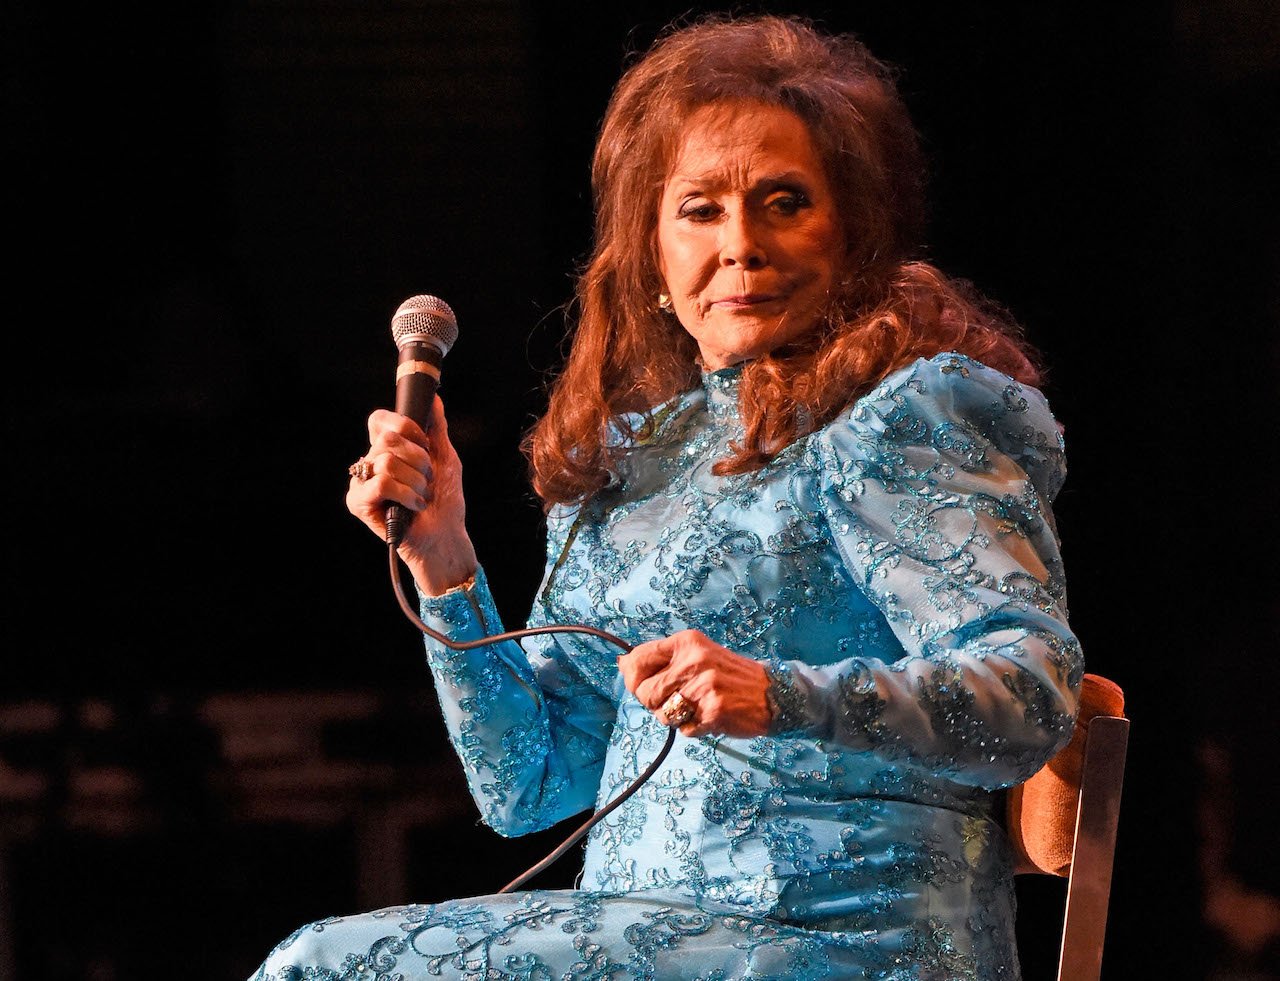 Loretta Lynn sits in a sparkly blue ball gown, holding a microphone in one hand and clenching the cord in her other fist